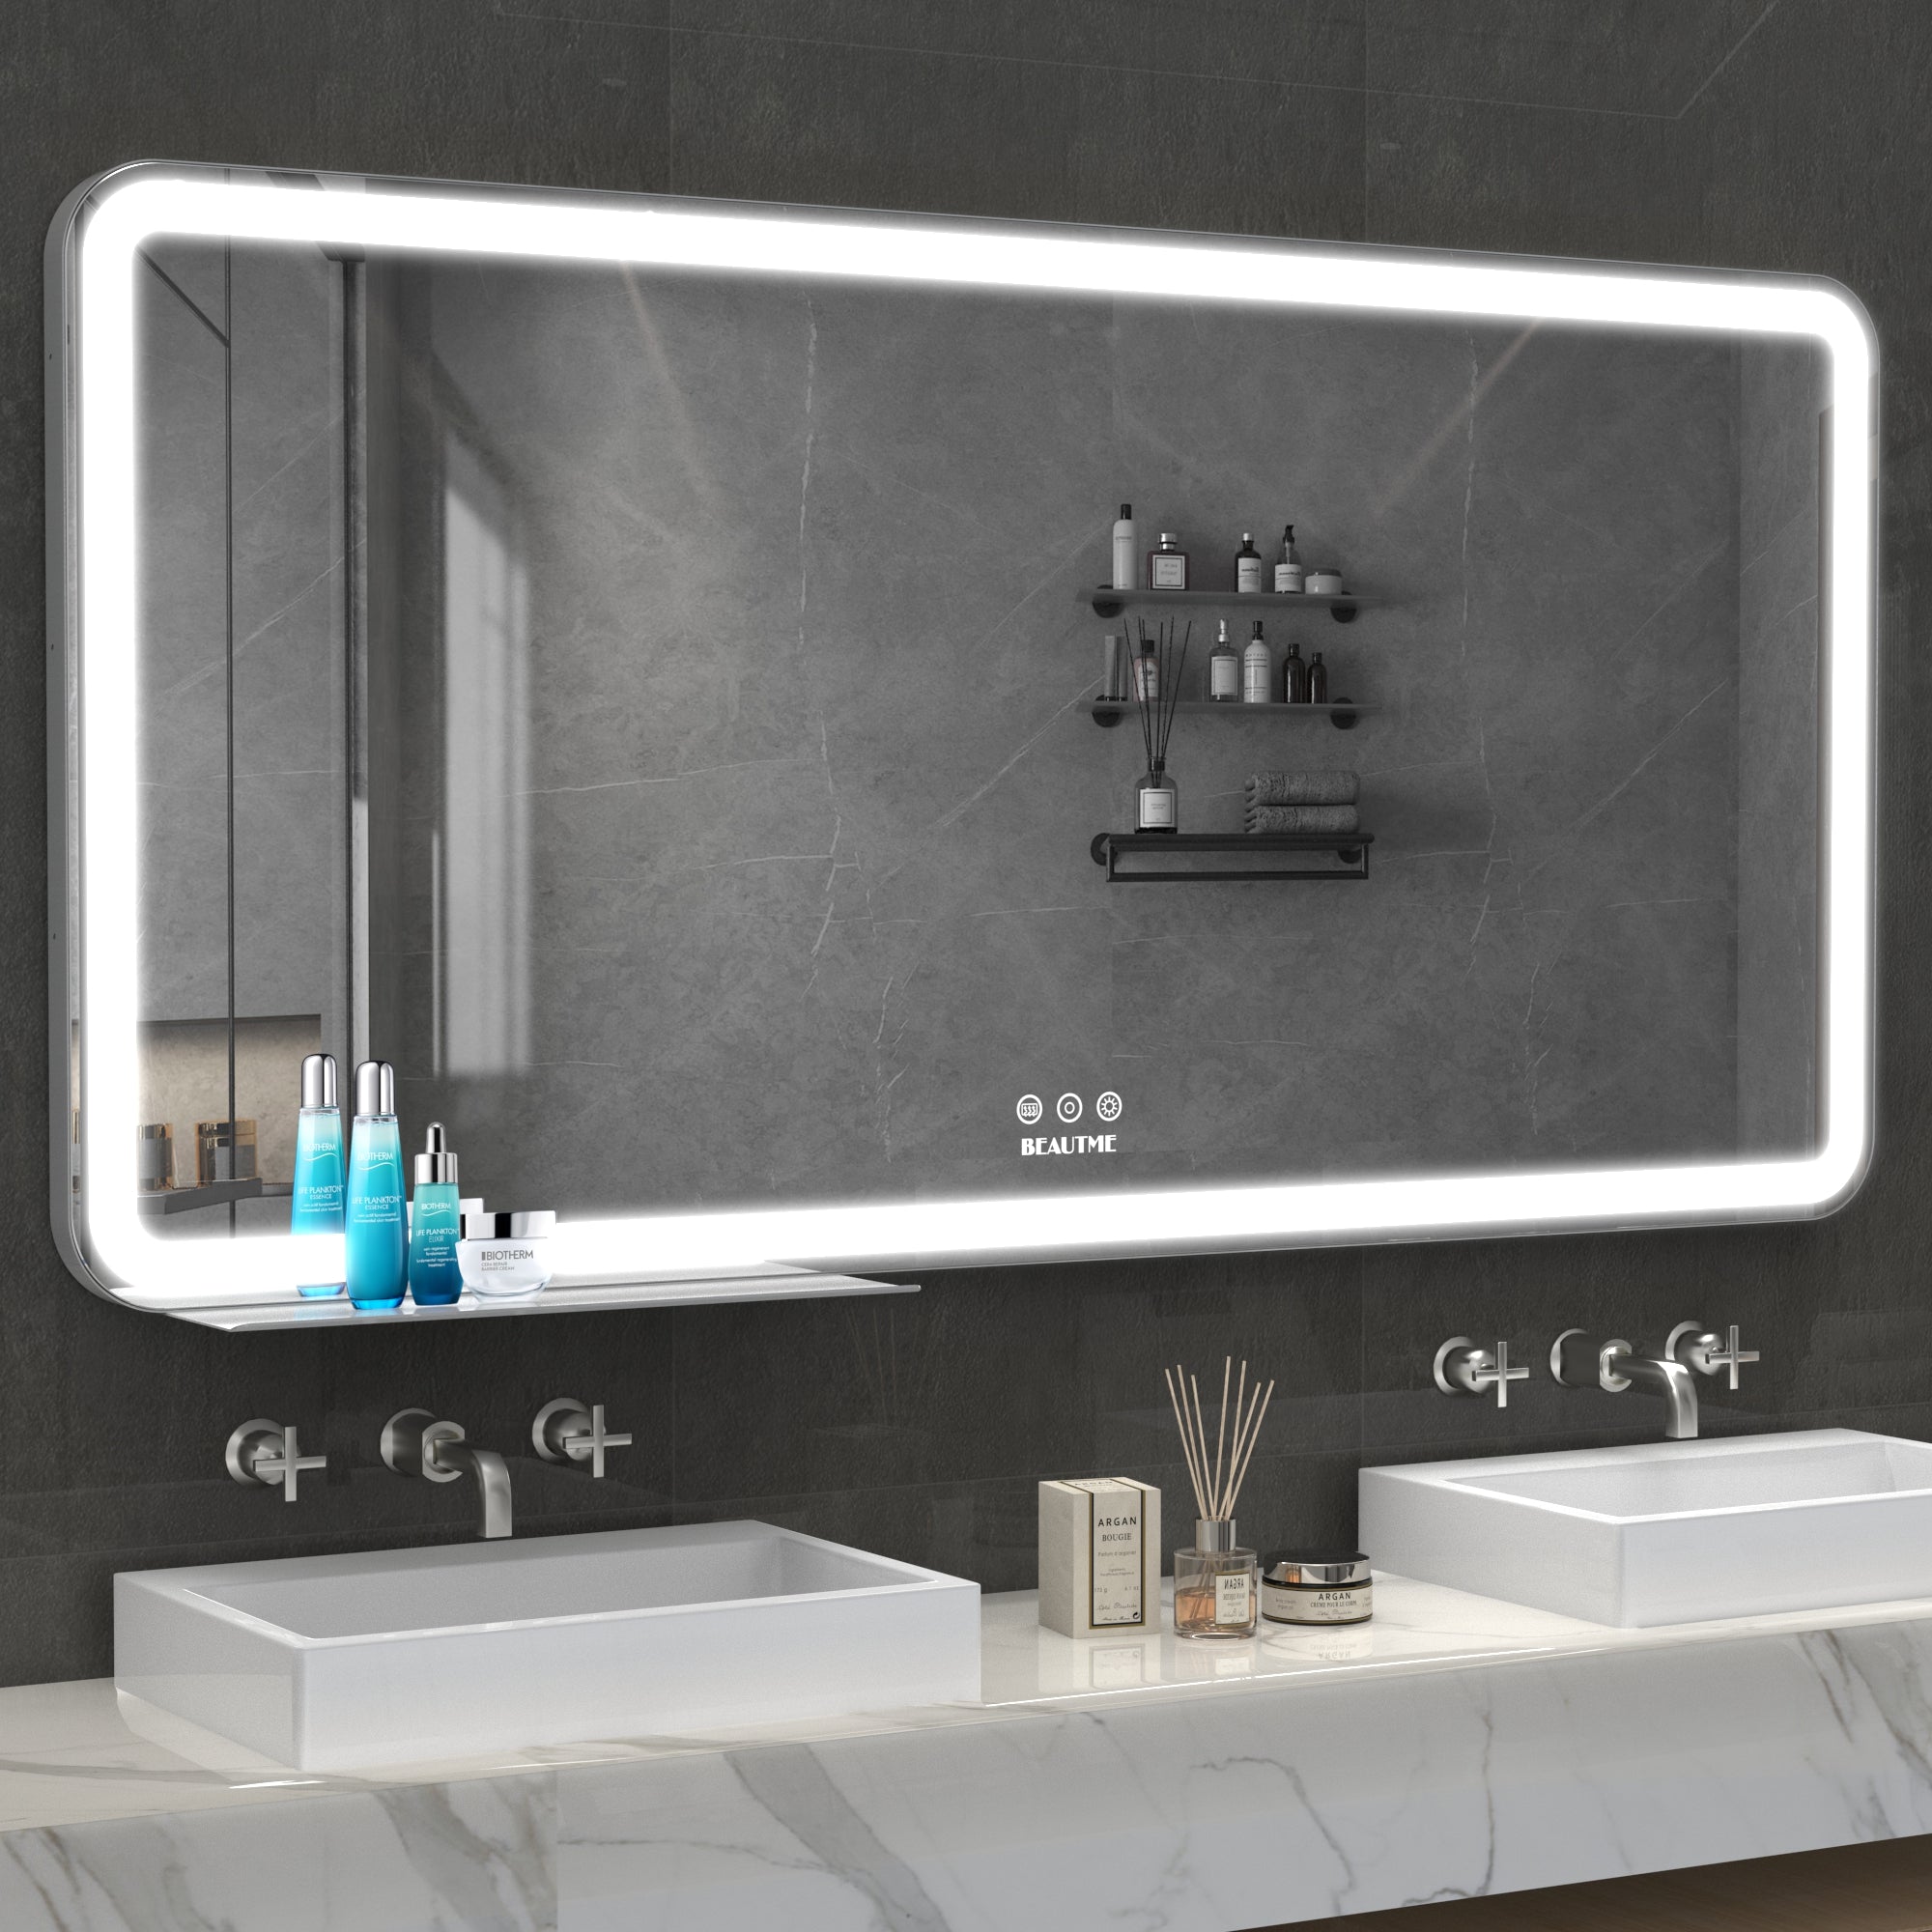 How to Select a Bathroom Mirror